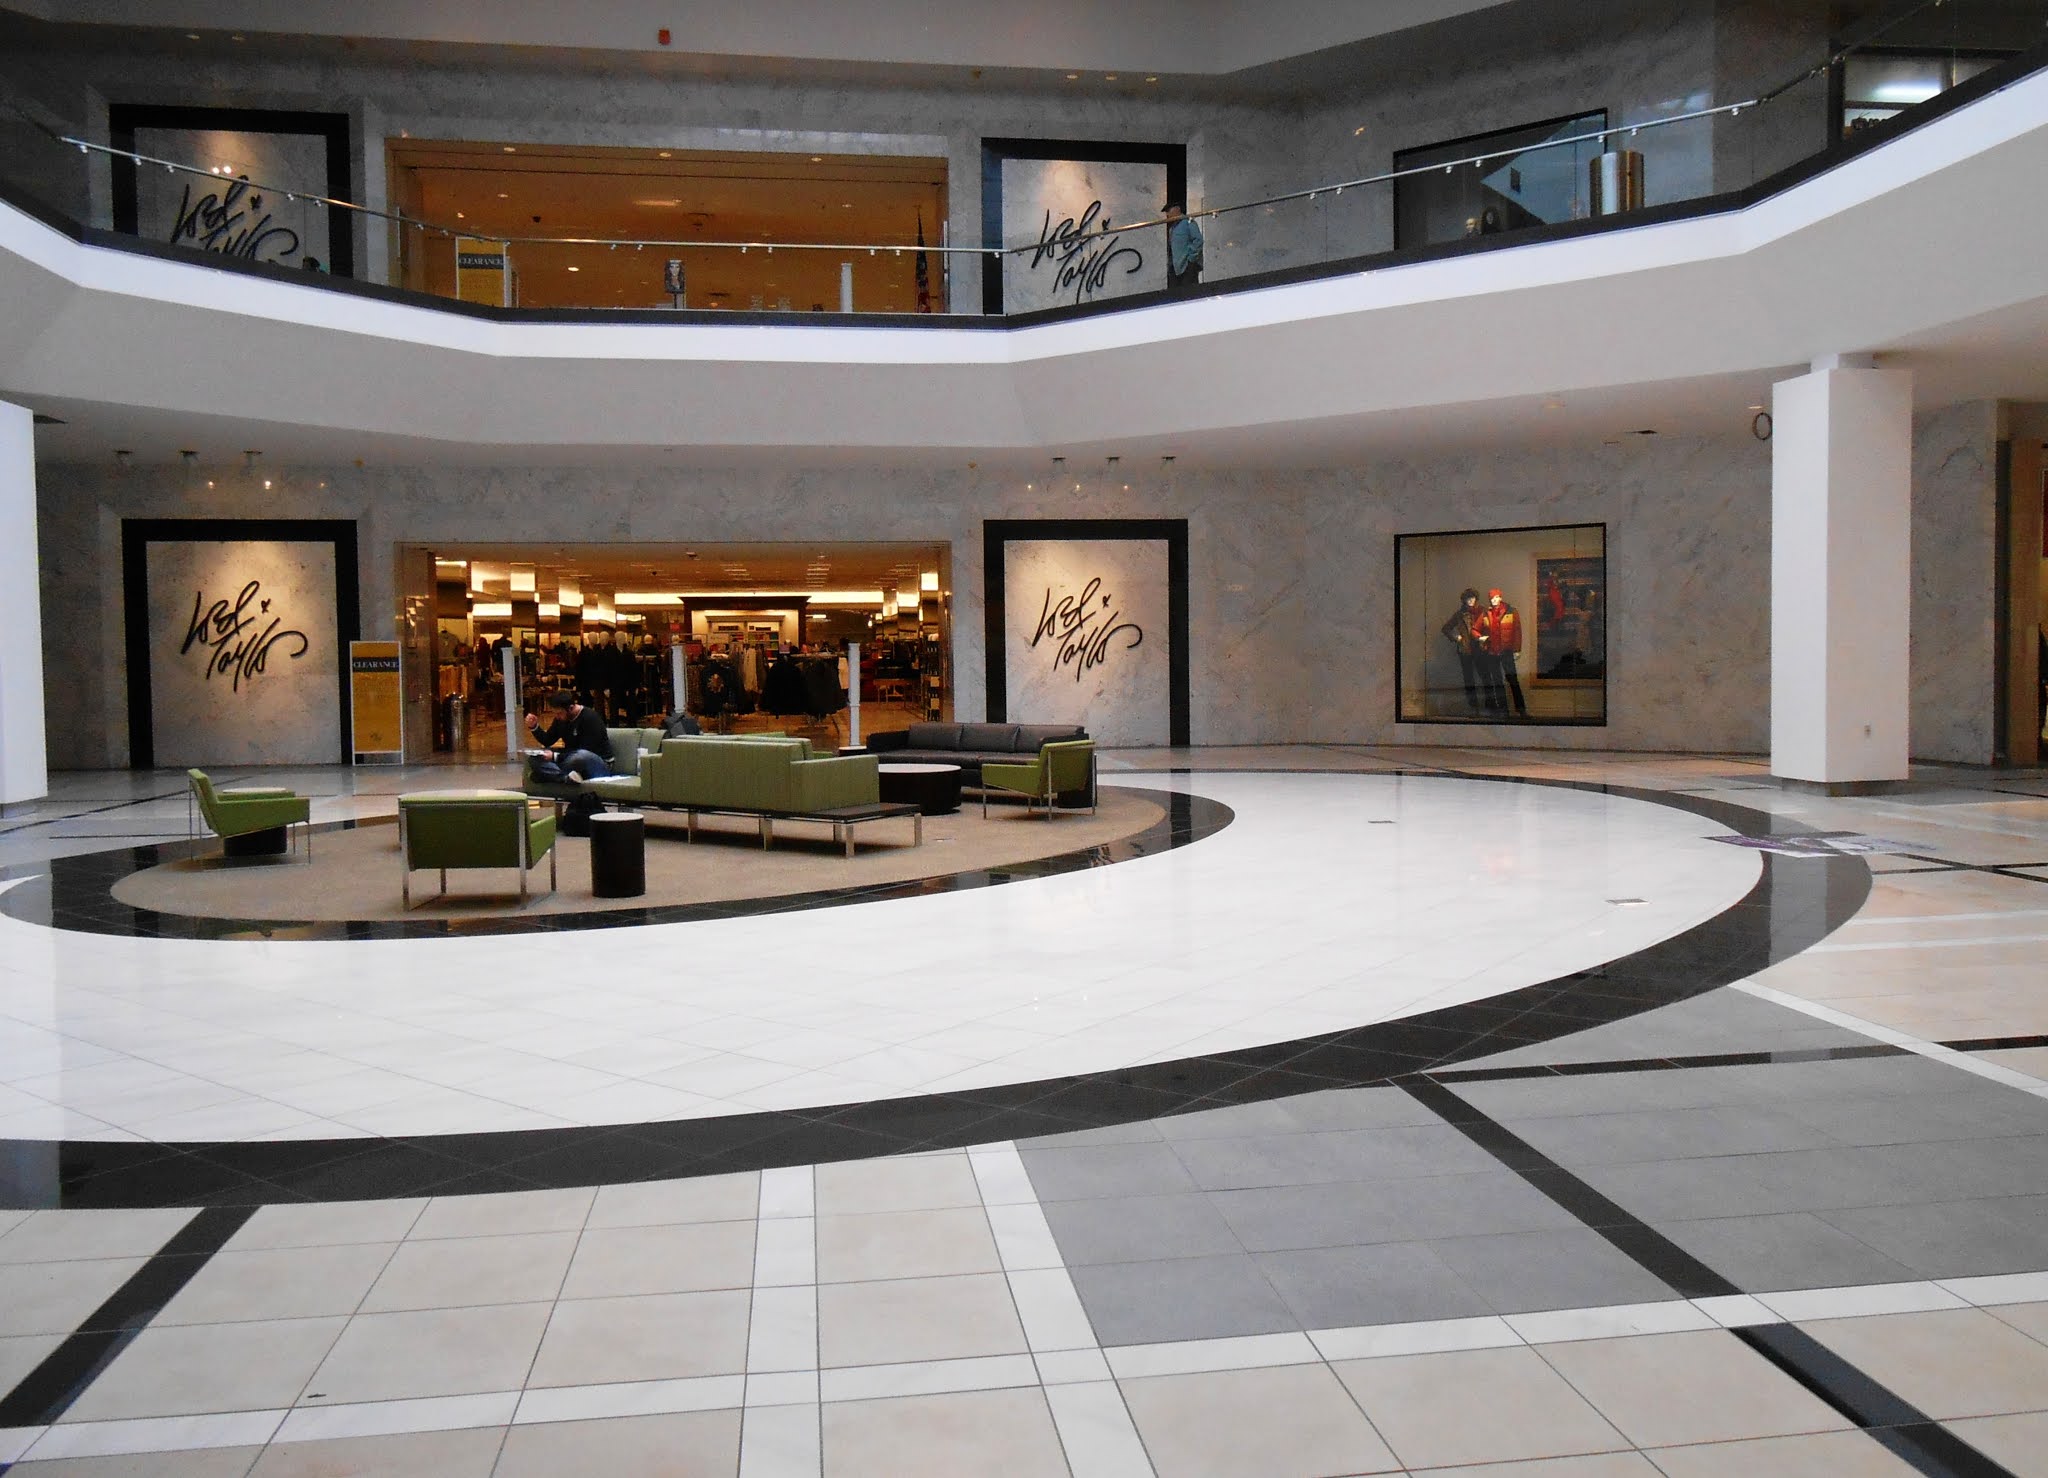 The Mall At Short Hills, Malls and Retail Wiki